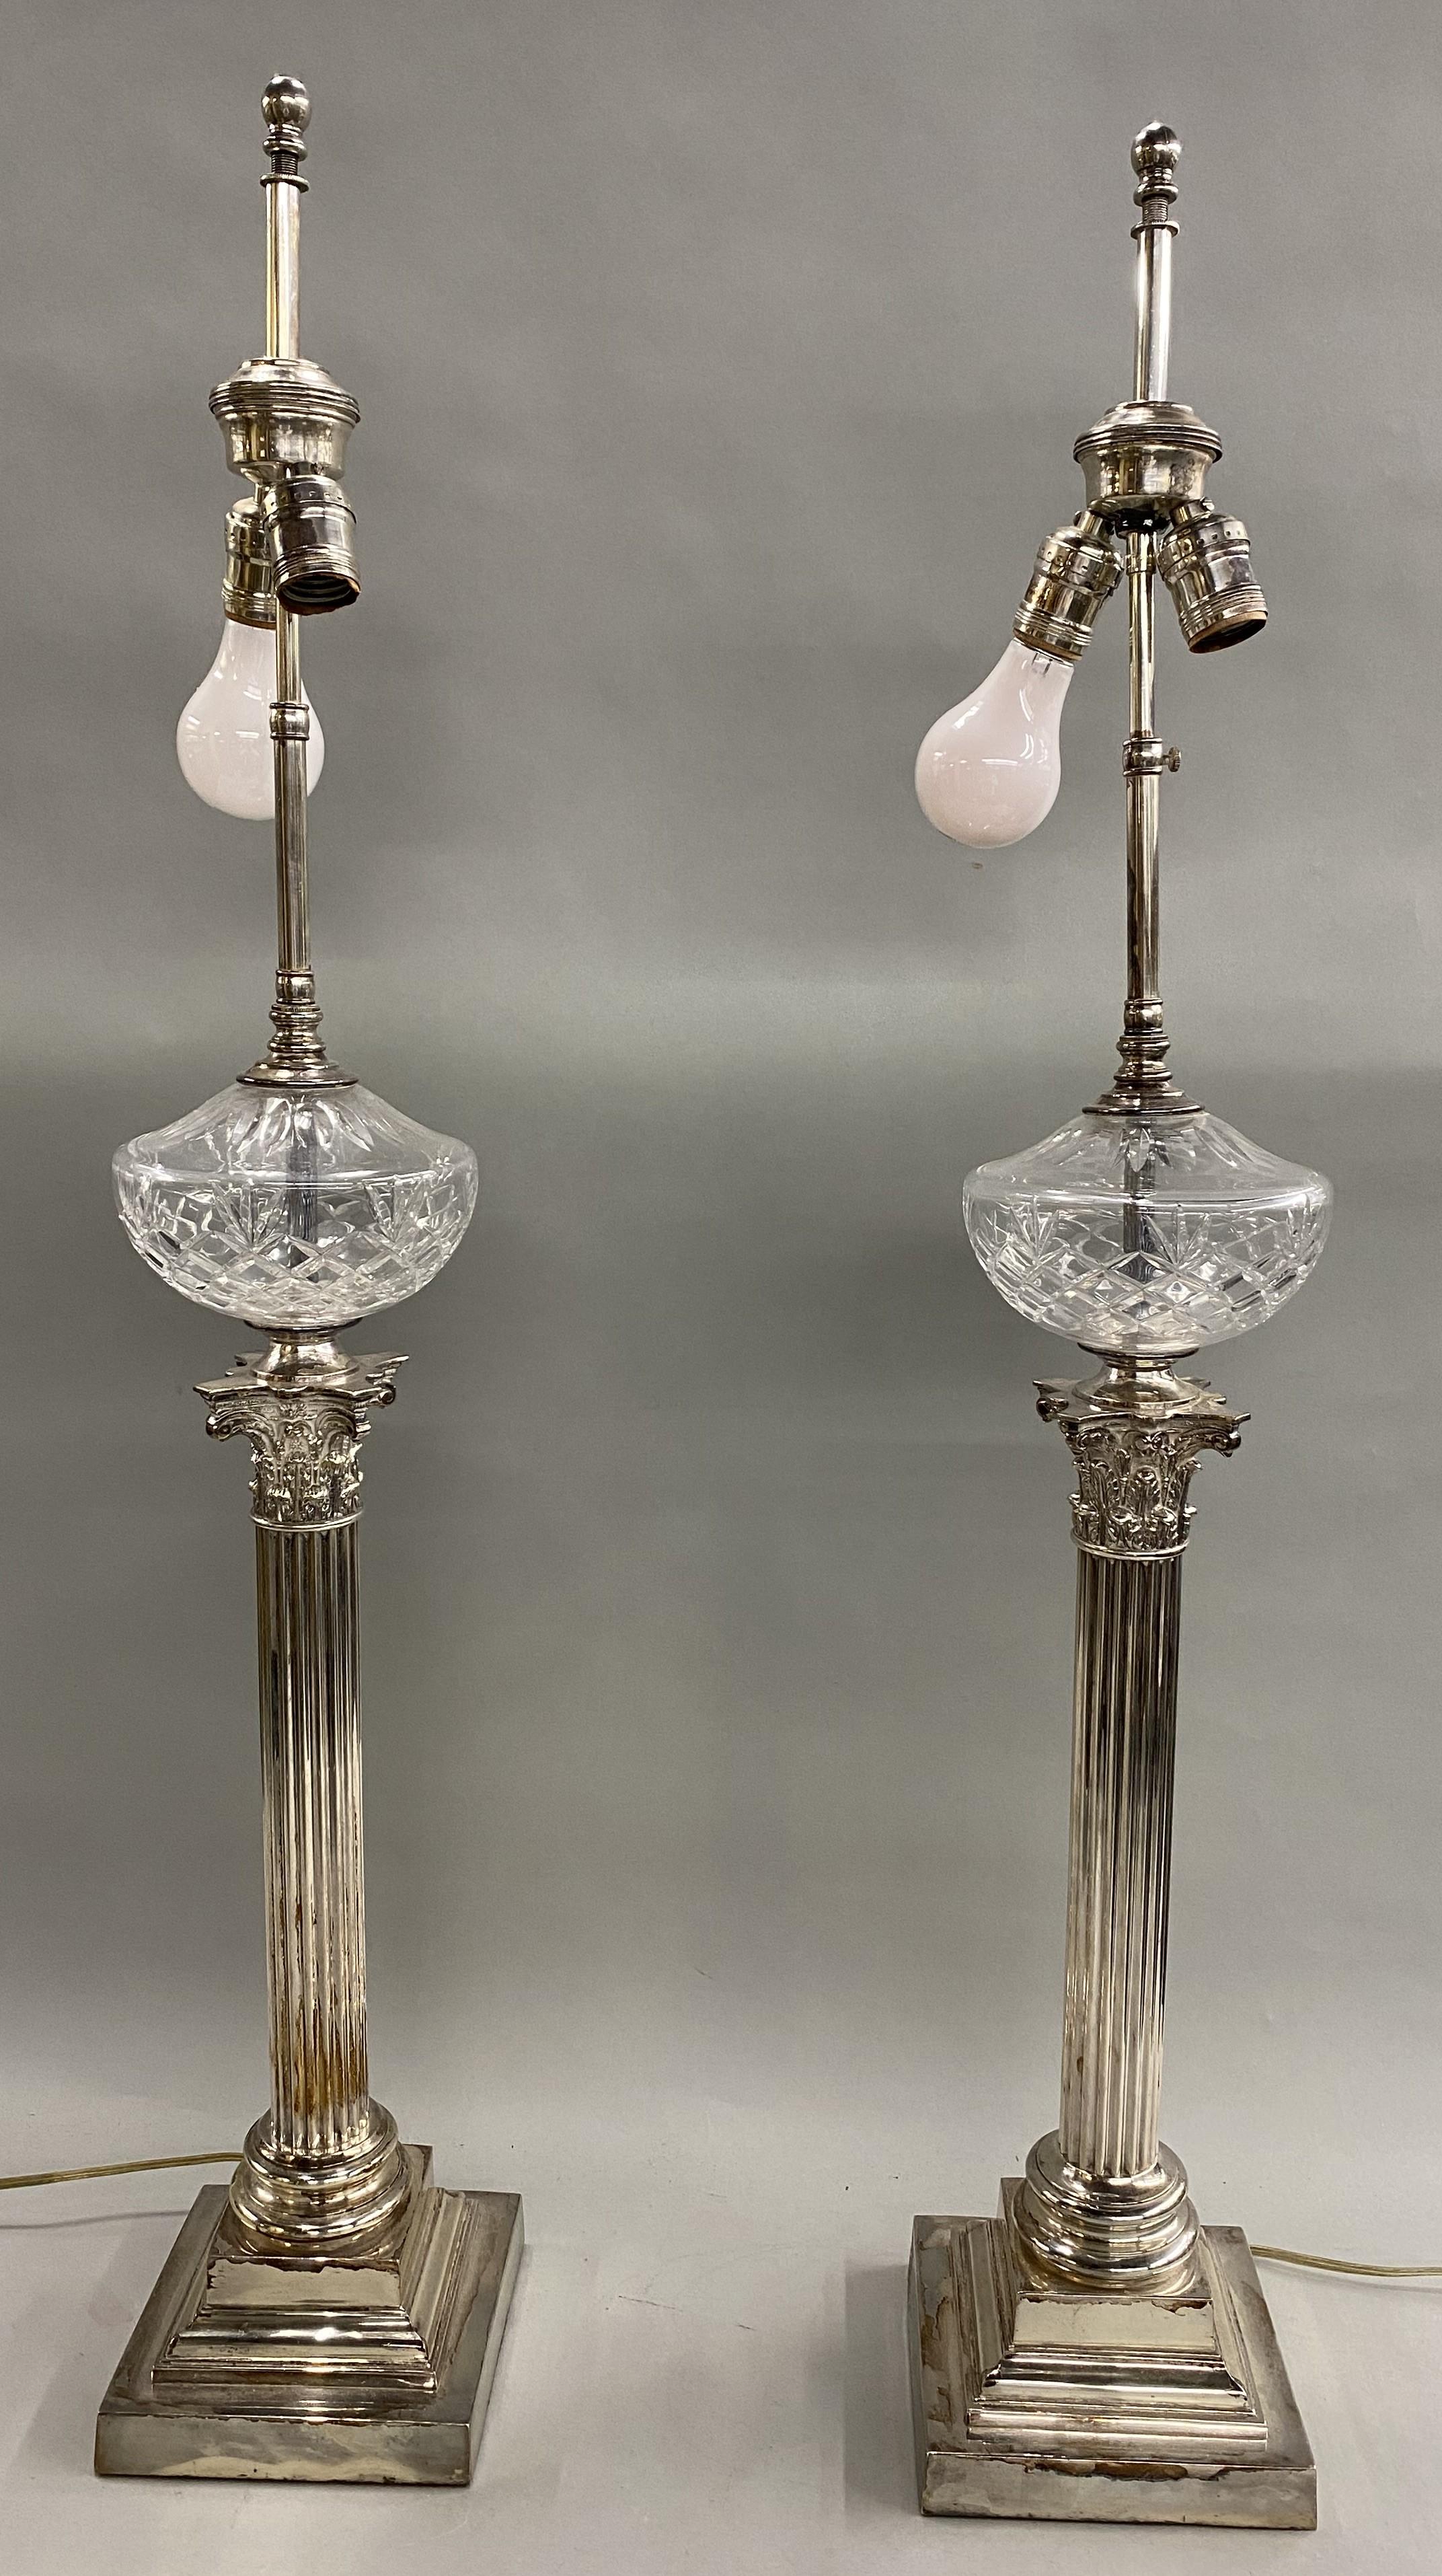  Spectacular Pair of Sheffield Fluted Columnar Banquet Lamps In Good Condition For Sale In Milford, NH